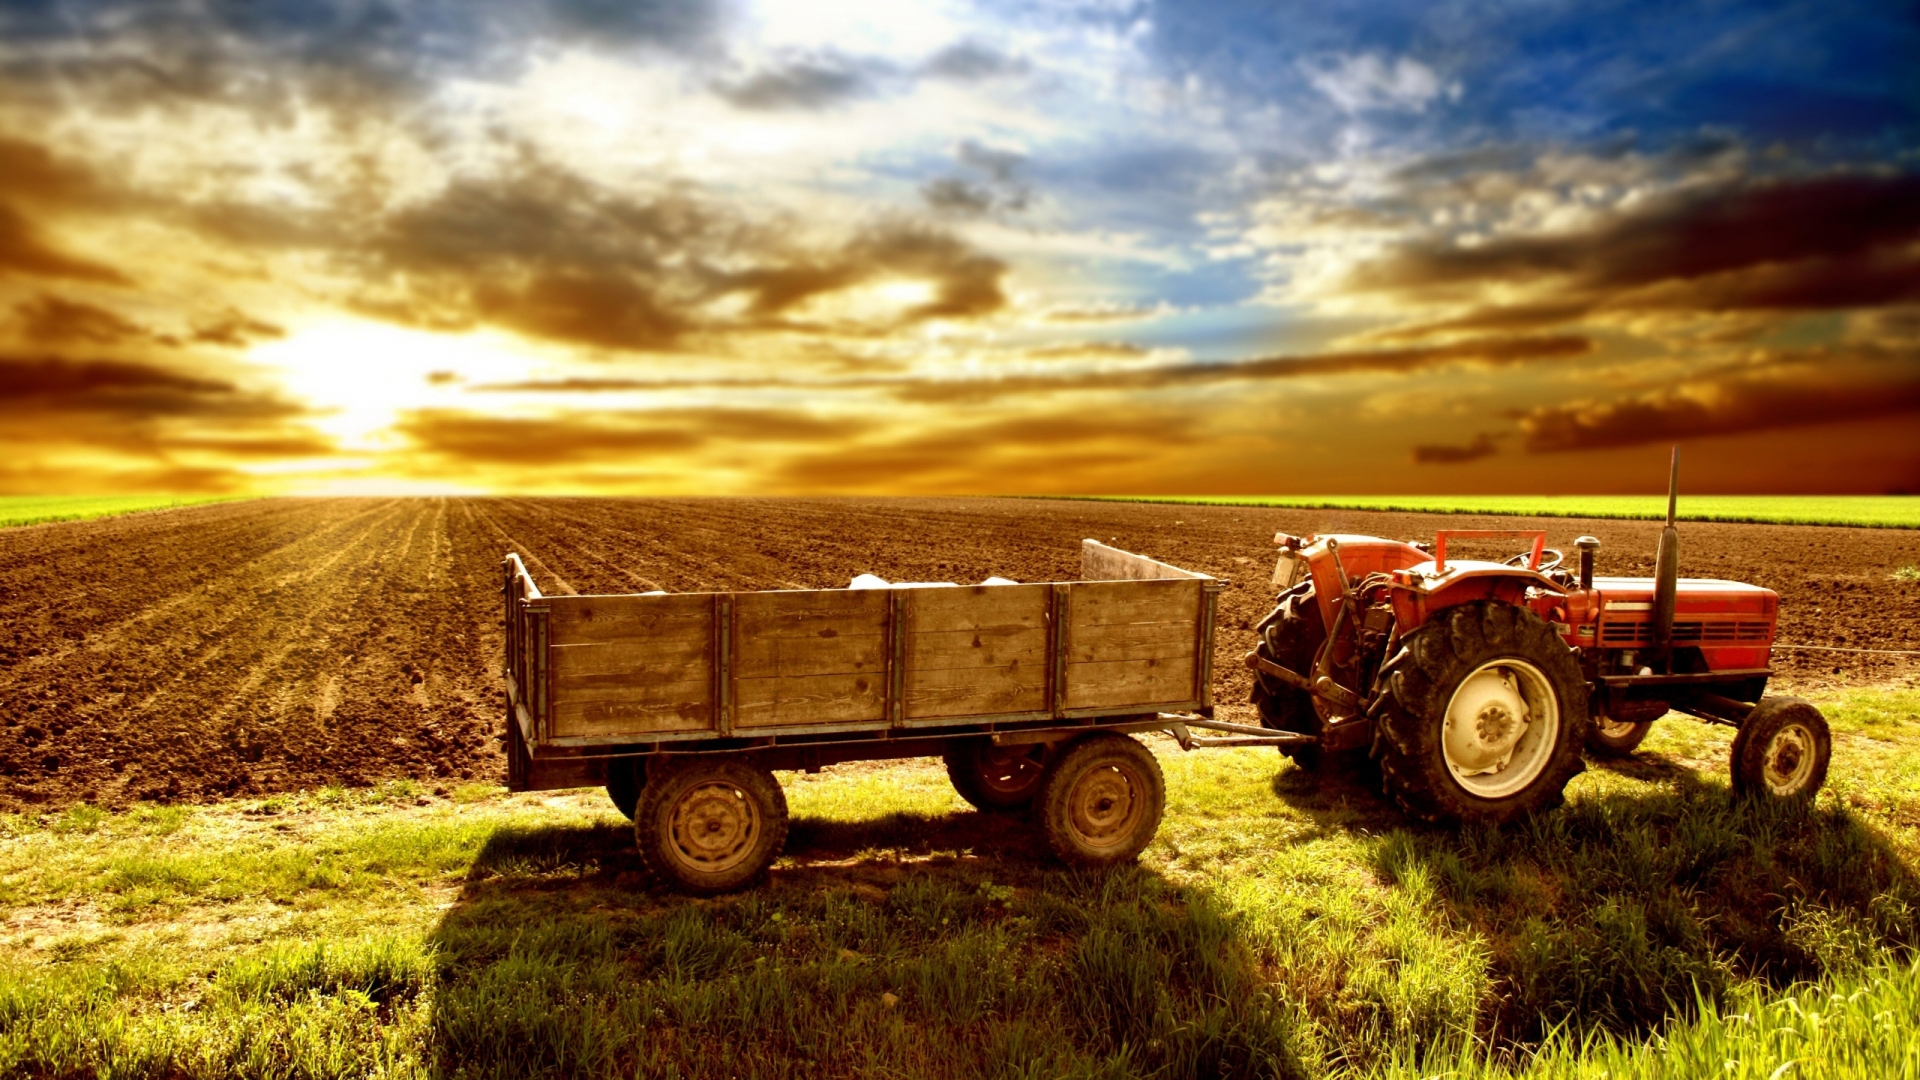 HDR Tractor for 1920 x 1080 HDTV 1080p resolution